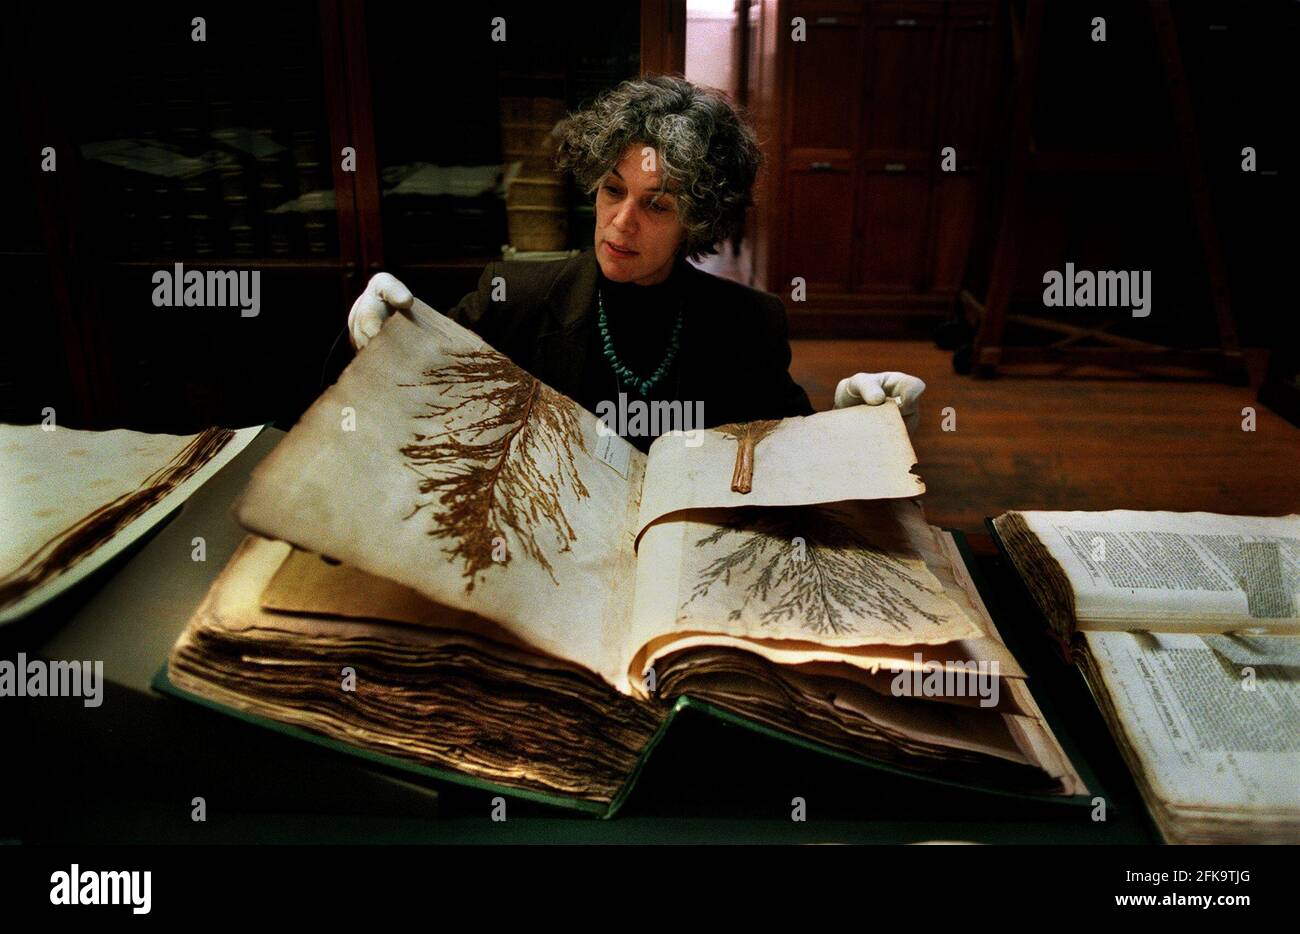 Dr Sandra Knapp Tropical Botanist December 1999at the National Museum looking at sugar cane specimens part of the Sir Hans Sloane Herbarium Stock Photo